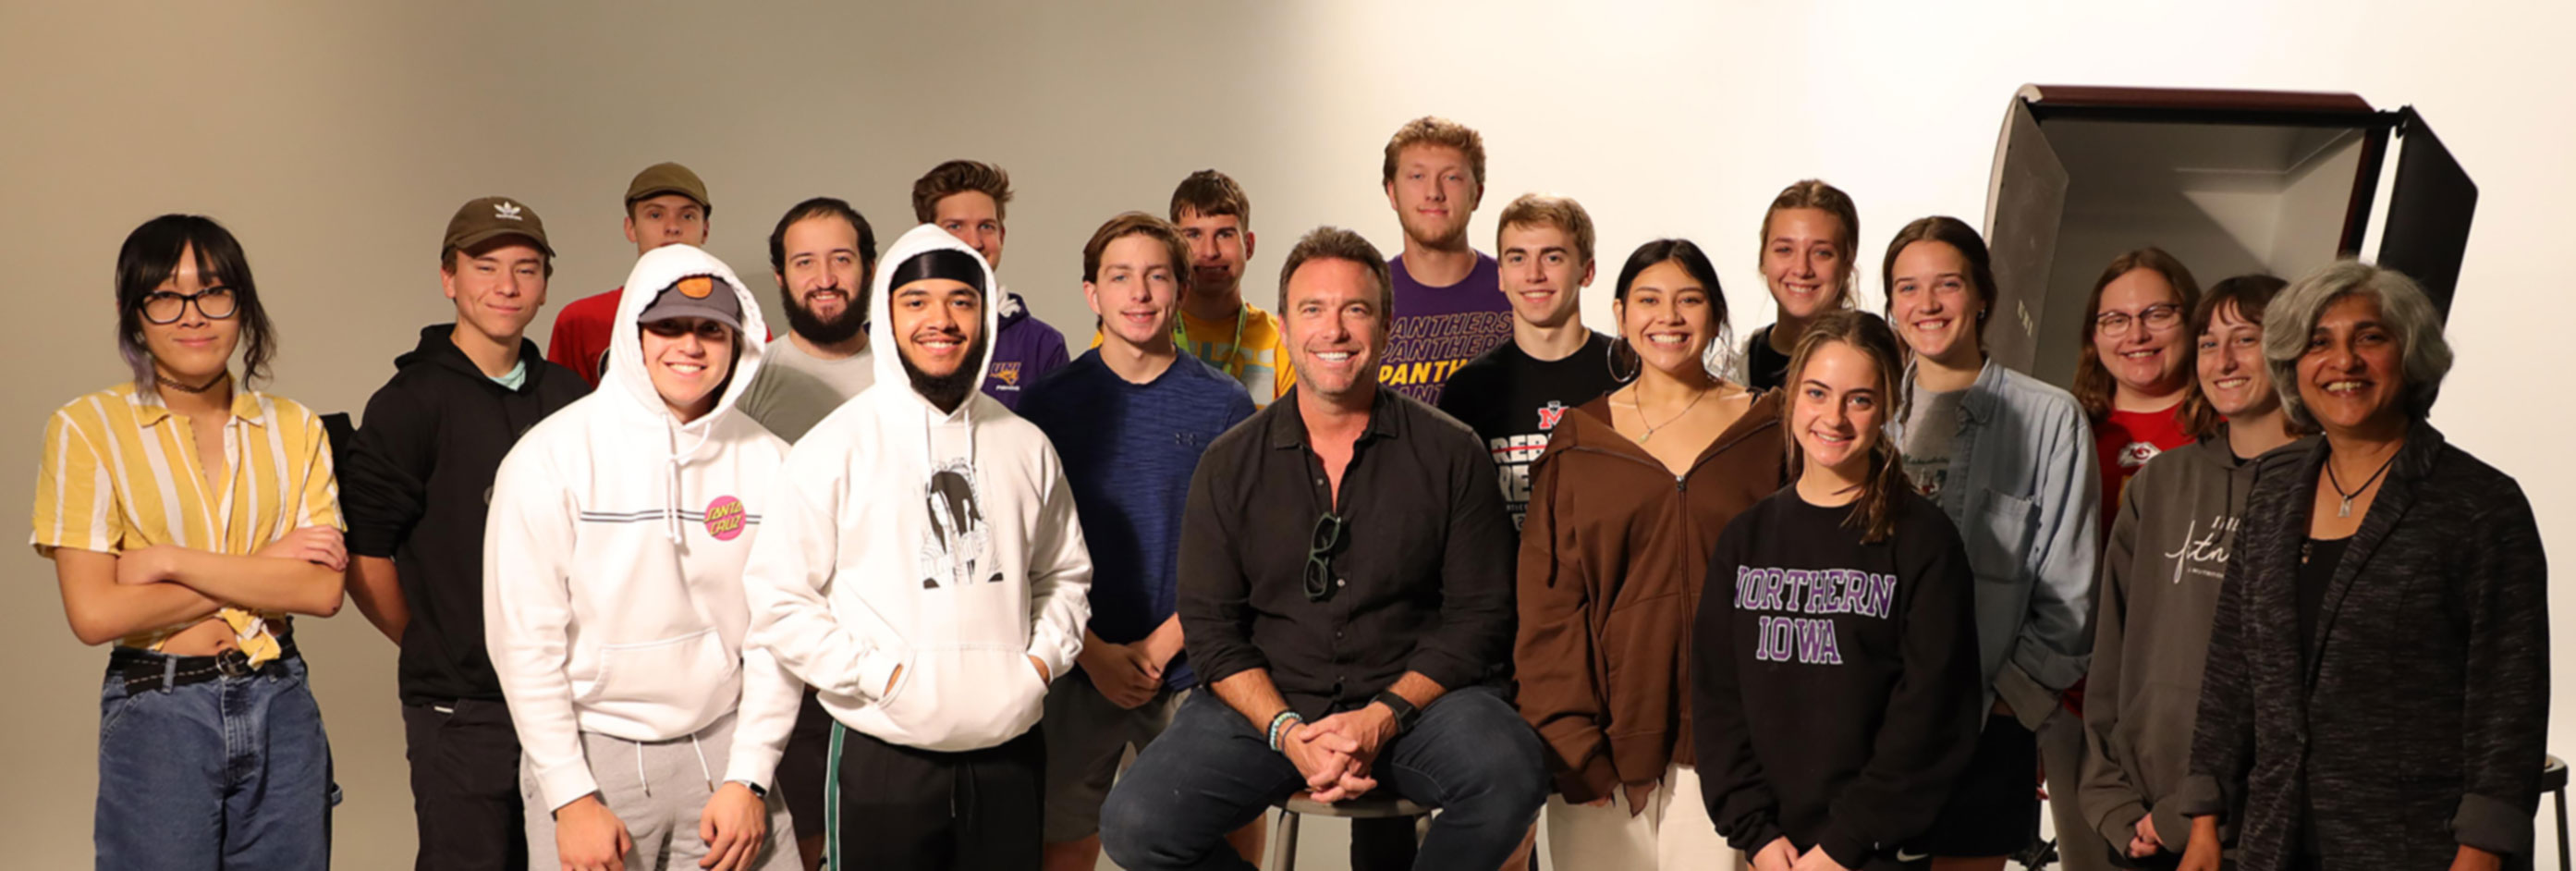 Digital Media students with Alex Boylan, host of The College Tour